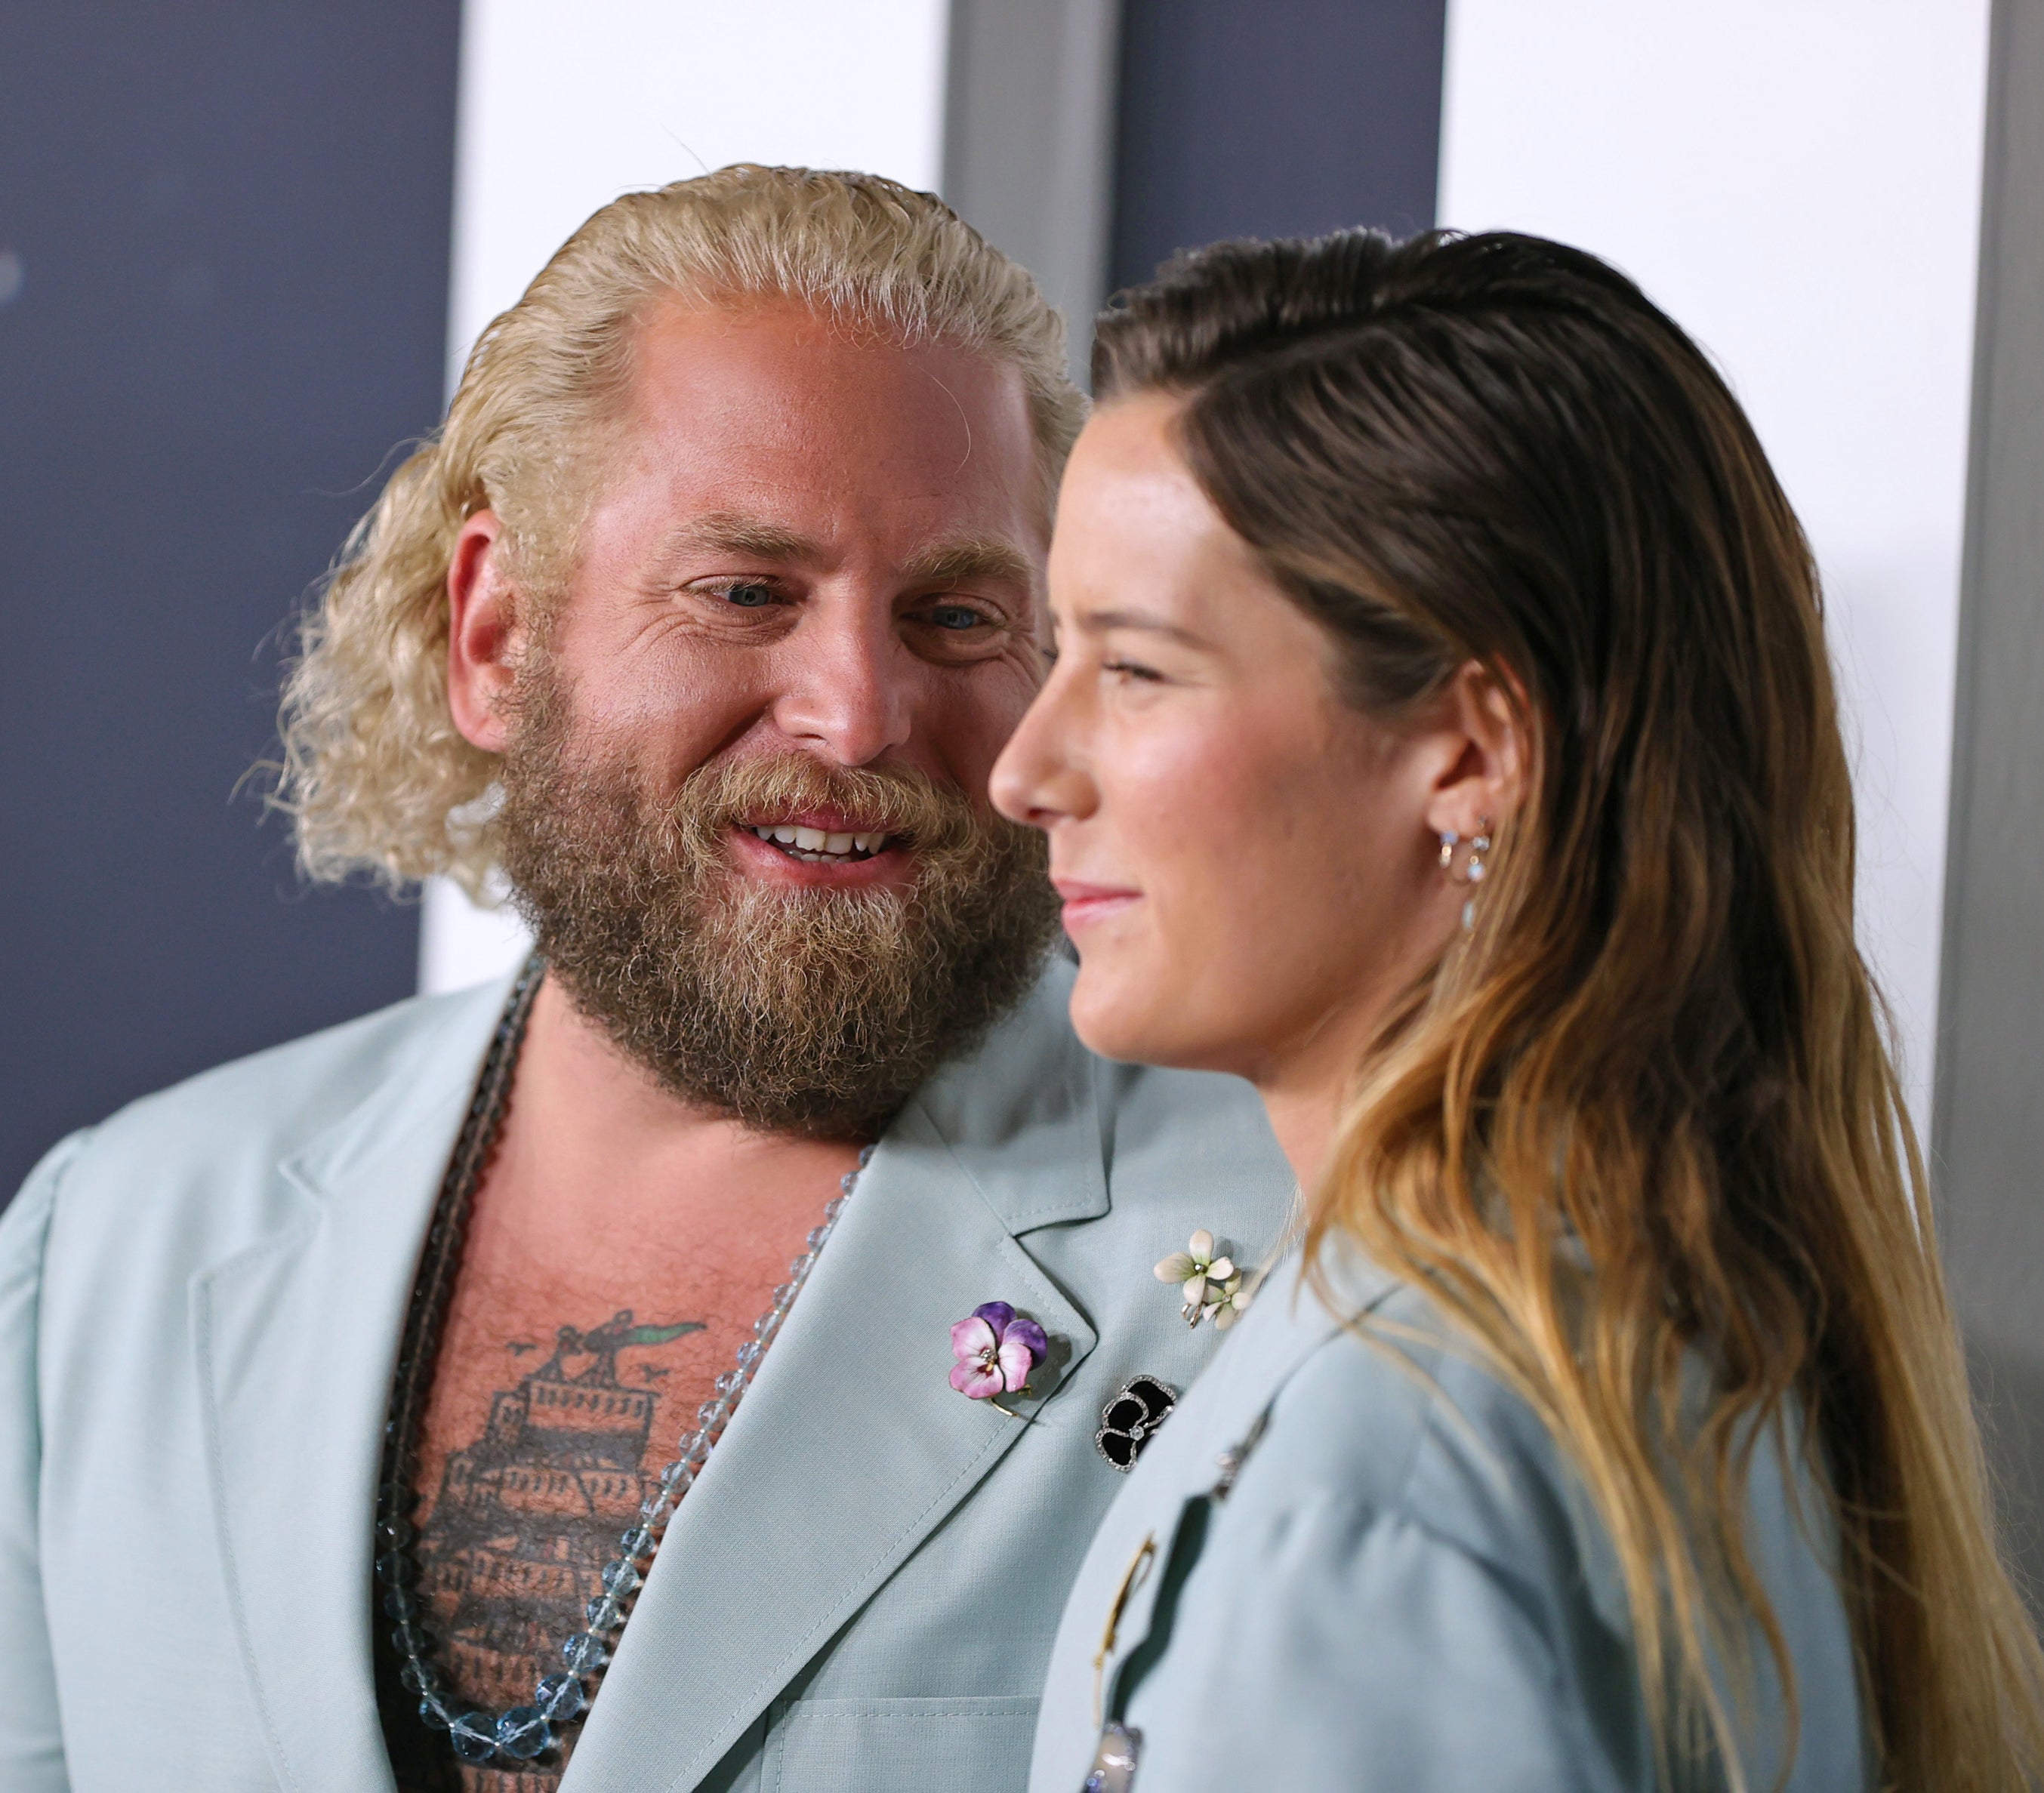 Close-up of Jonah and Sarah at a press event wearing matching suits